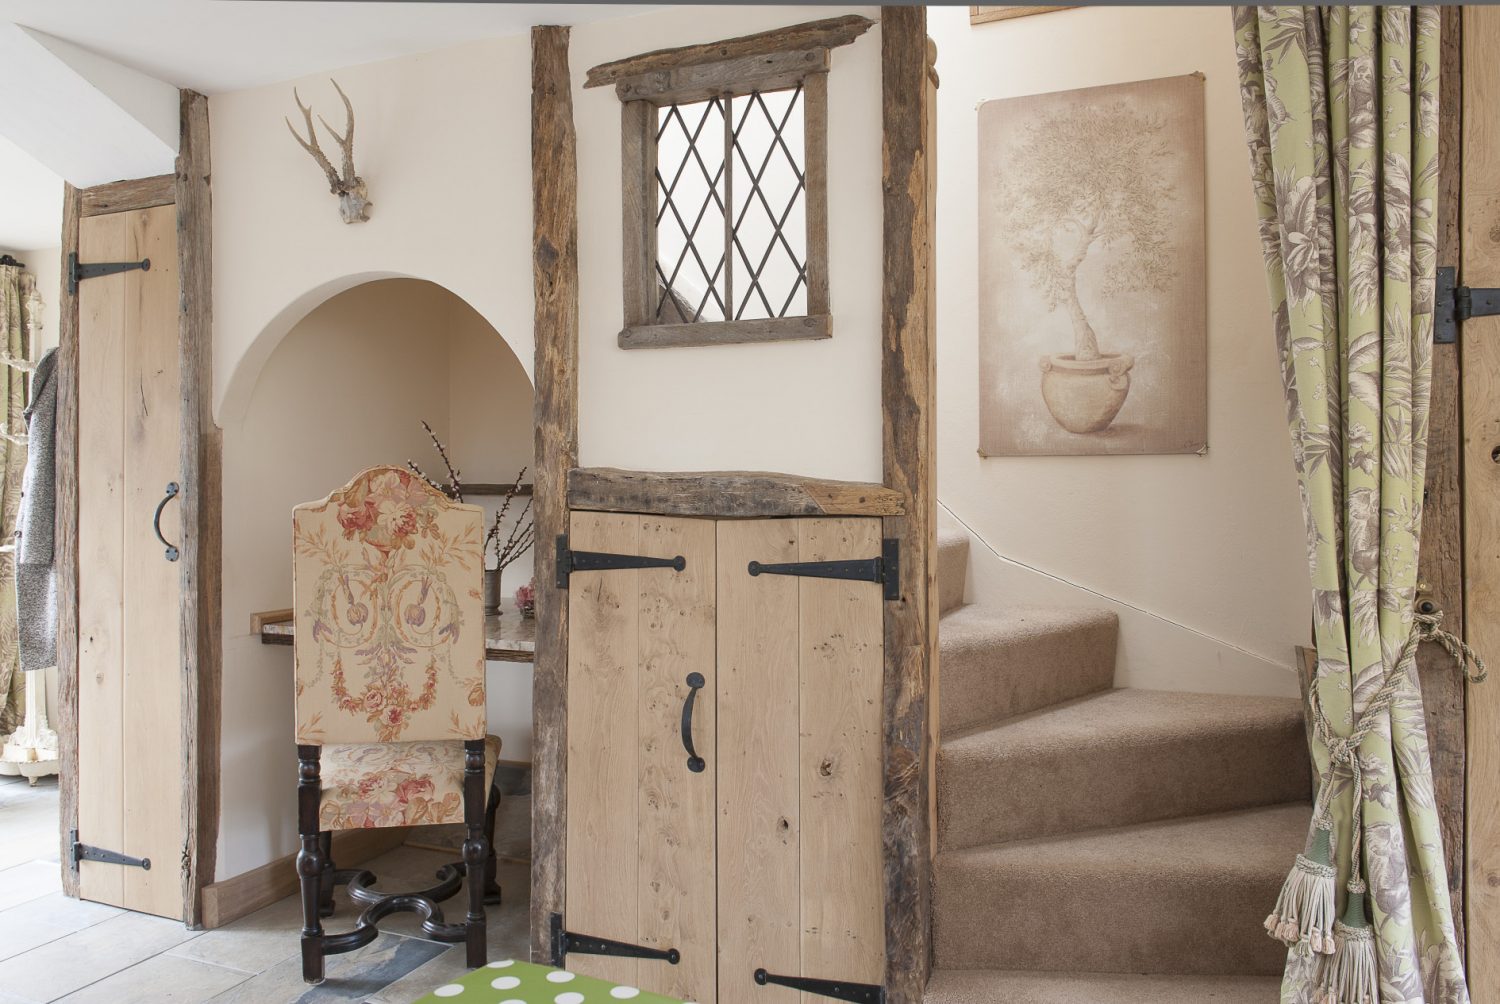 Caroline’s ‘medieval office wall’.A pink marble-topped desk has been fitted into an arched alcove and a leaded light illuminates the ascent upstairs